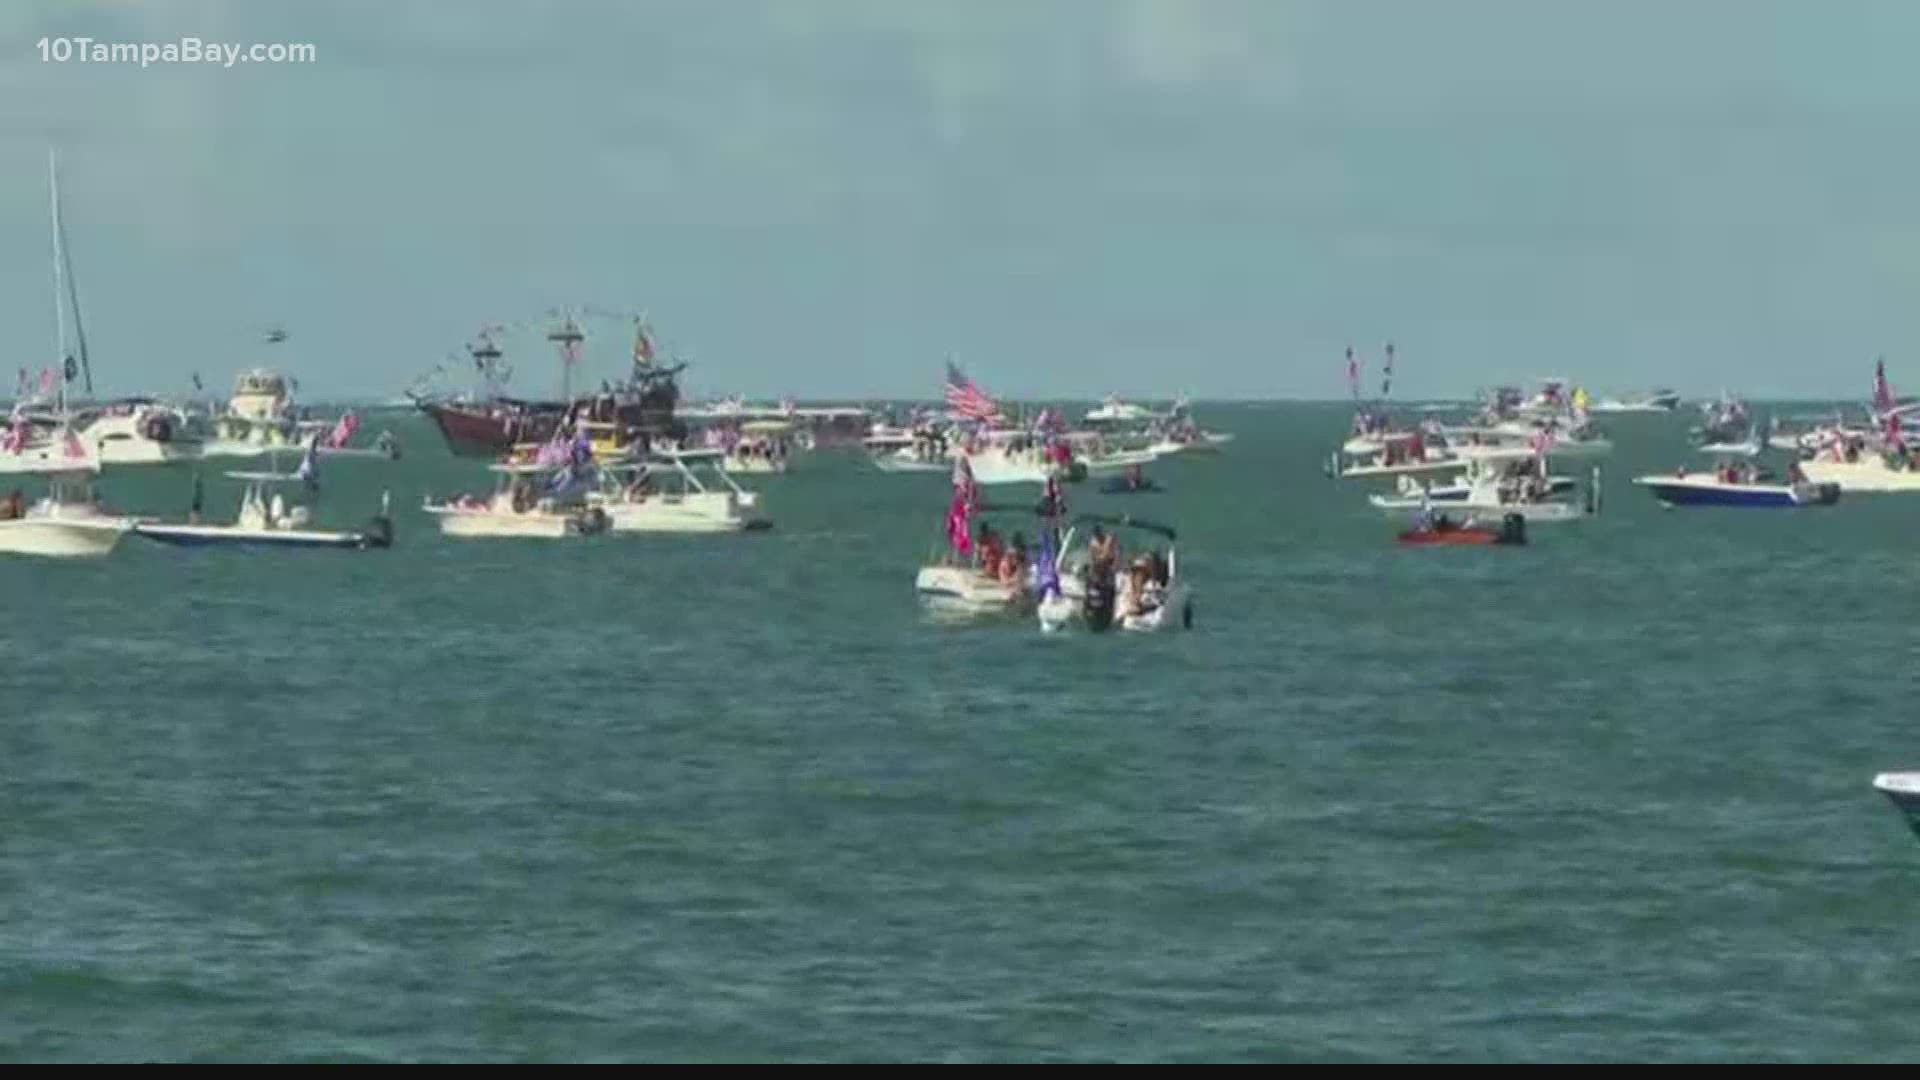 Supporters of the 45th president will sail from Clearwater Beach to Madeira Beach Saturday morning.